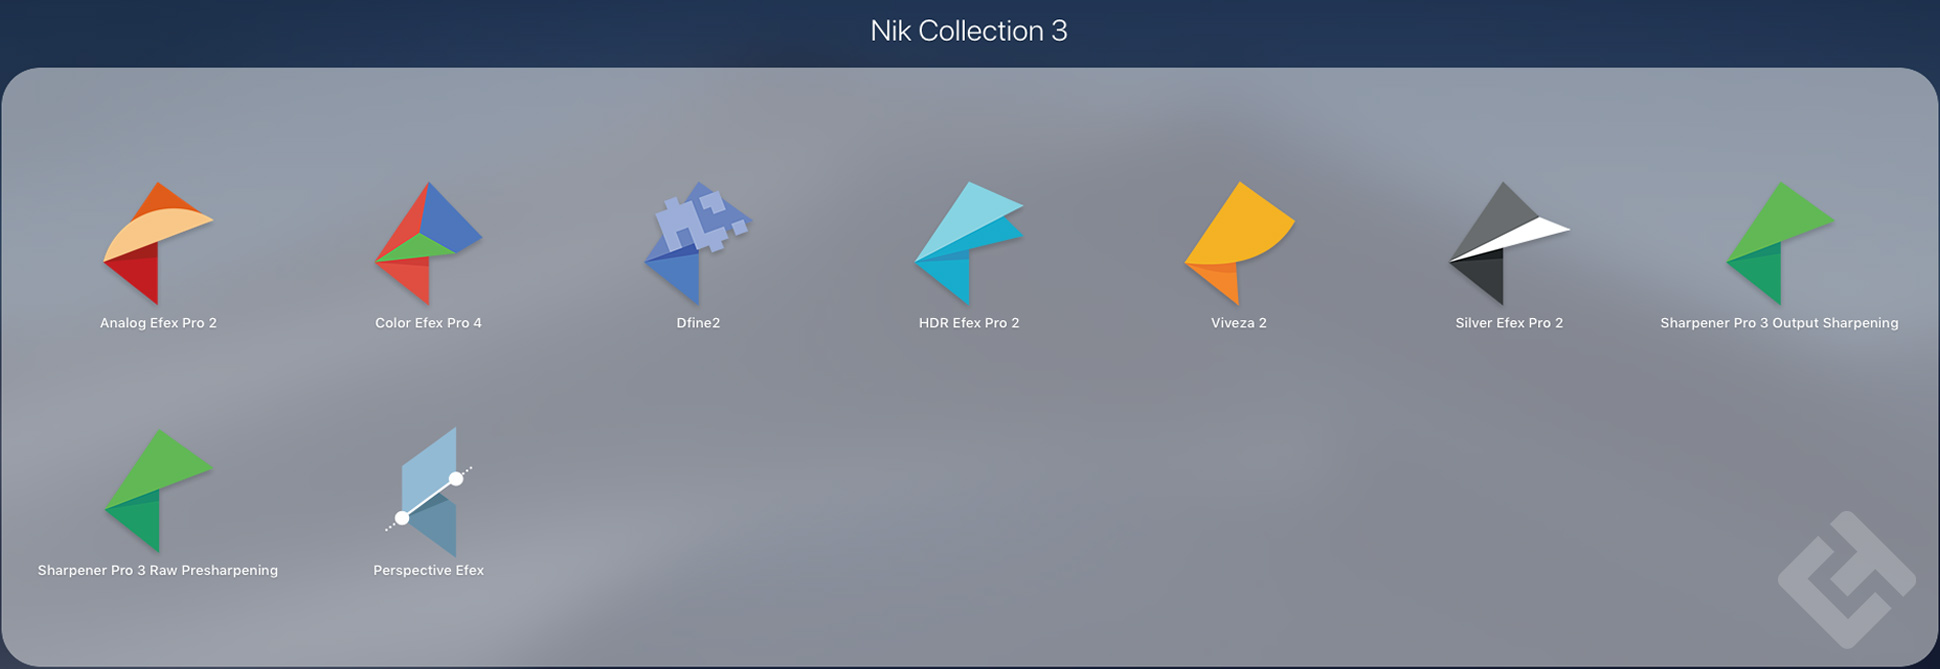 nik collection 3